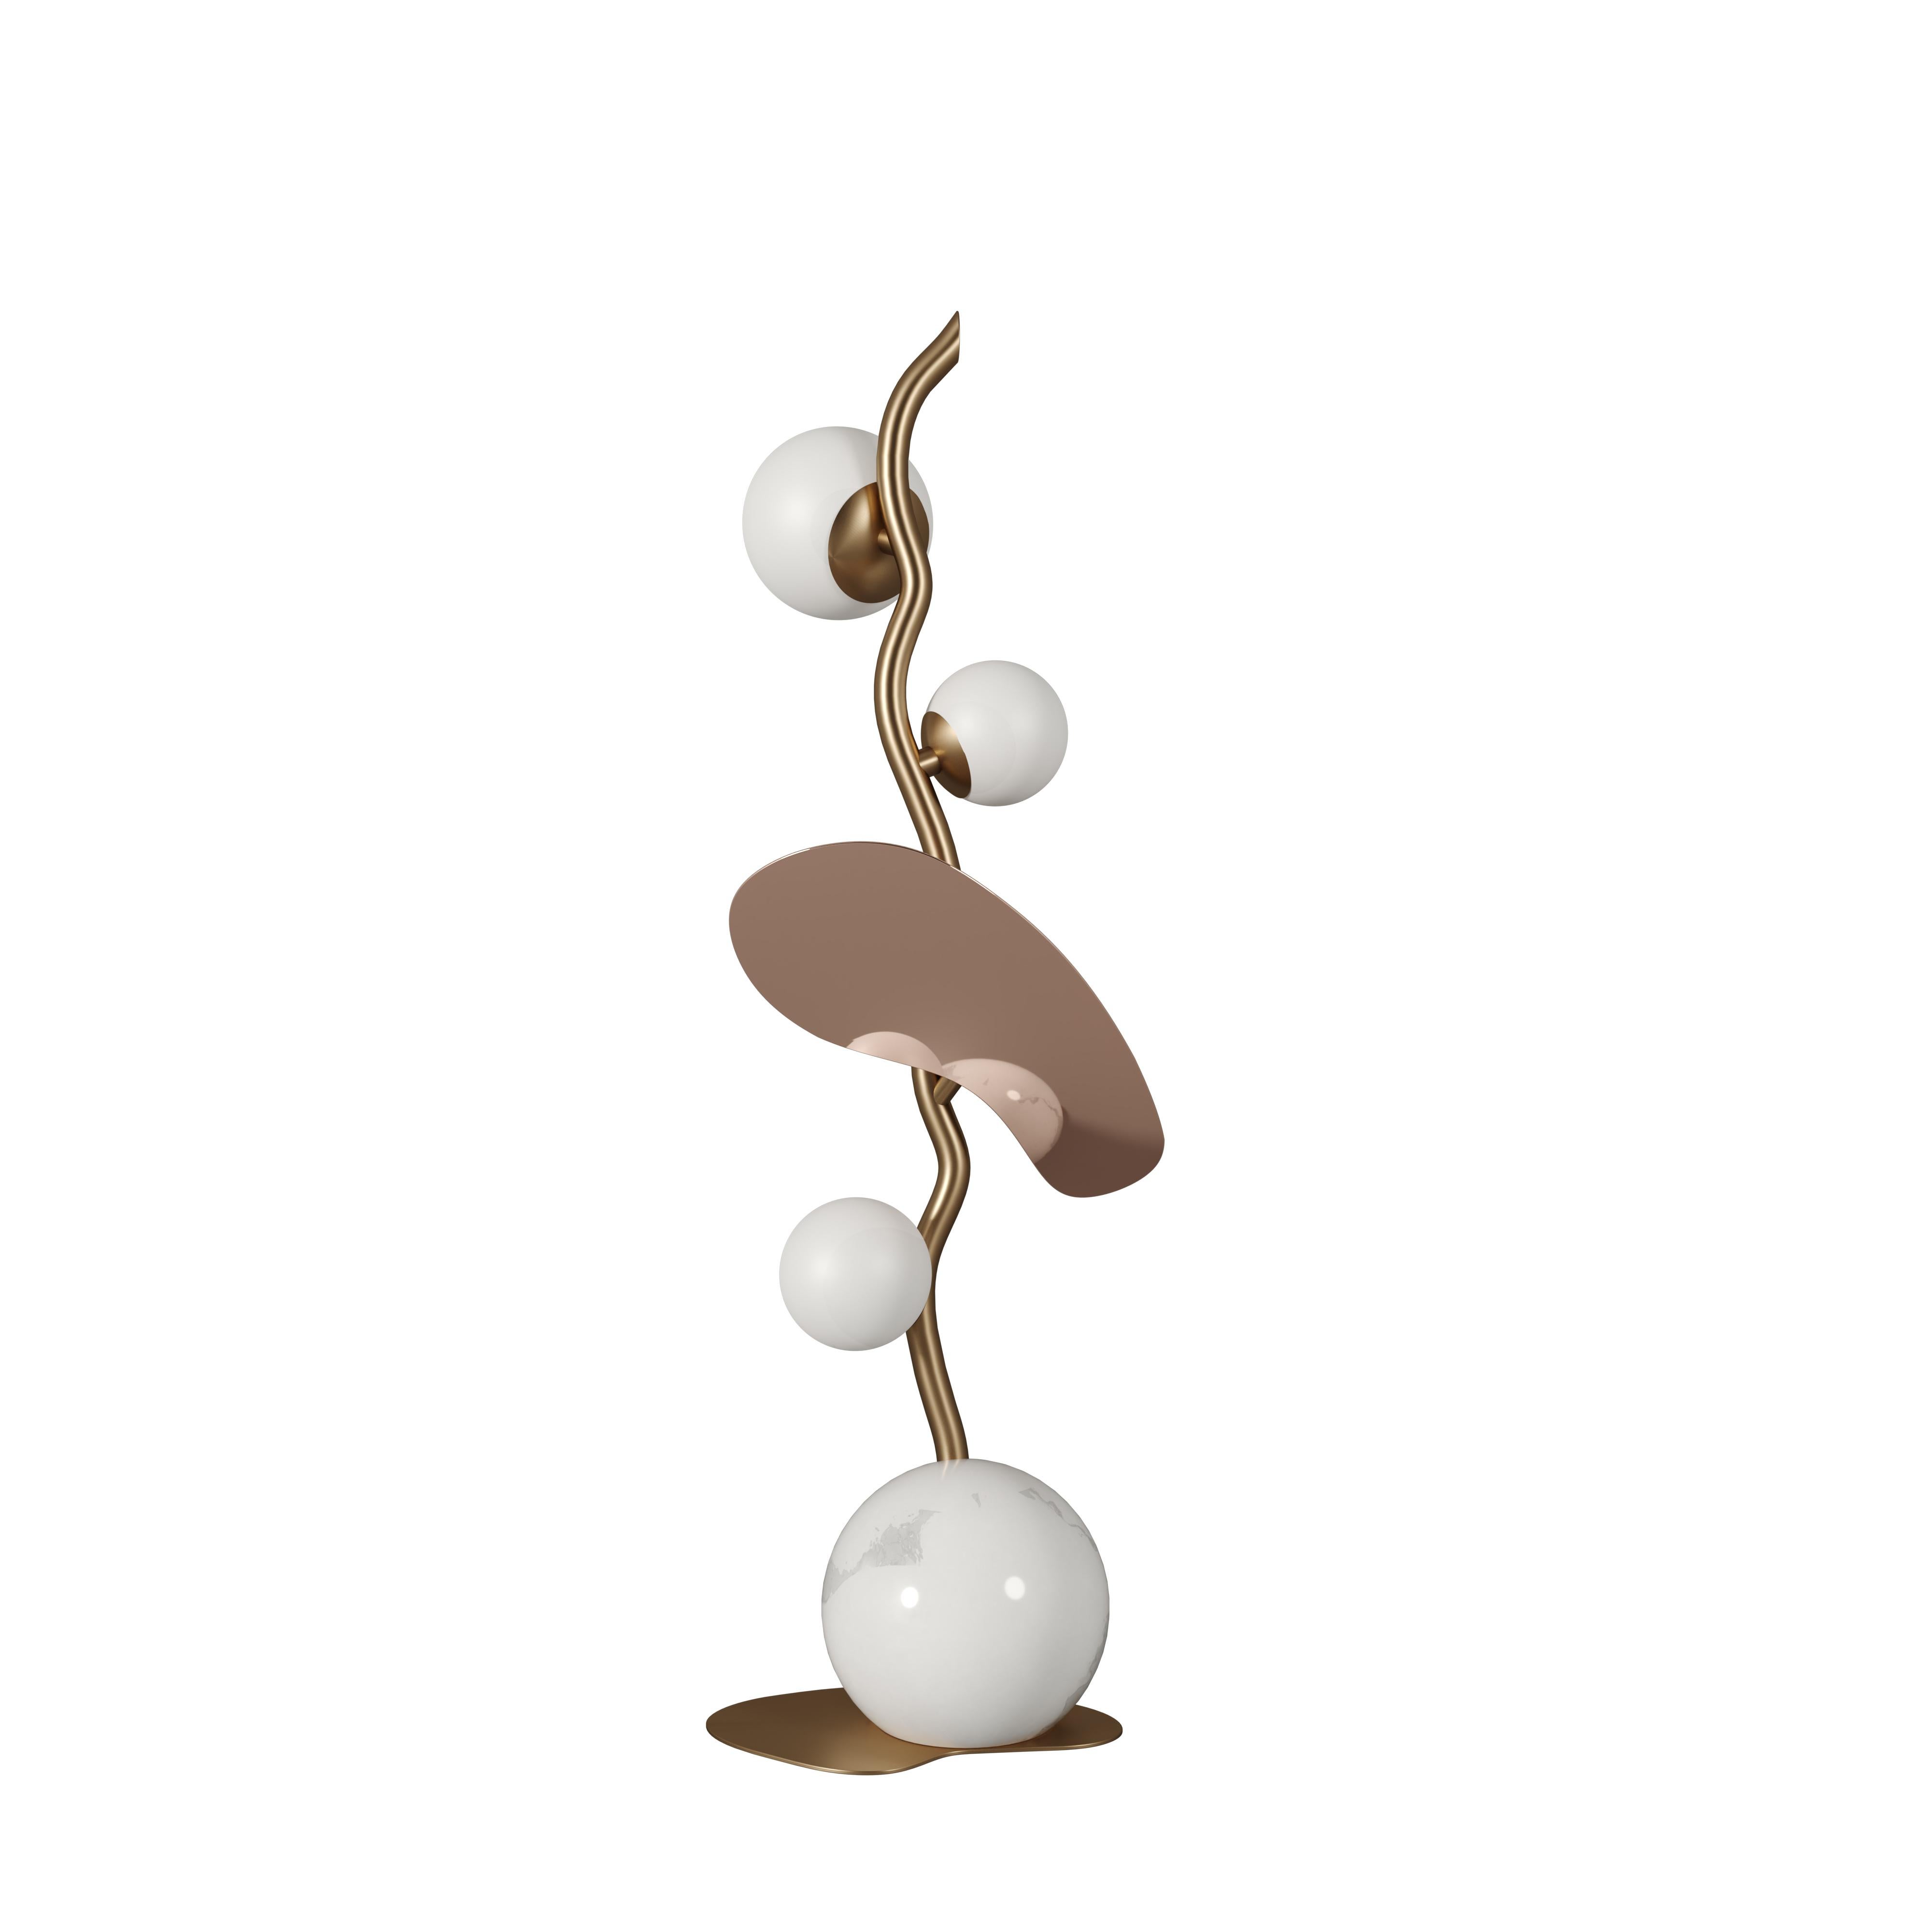 Falling in love with this peculiar tree, Creativemary designers conceived the Almond table lamp to bloom in your décor space. Highlighting the natural shape of the Almond Tree, the lighting structure is made in brass, reminding us of the tree